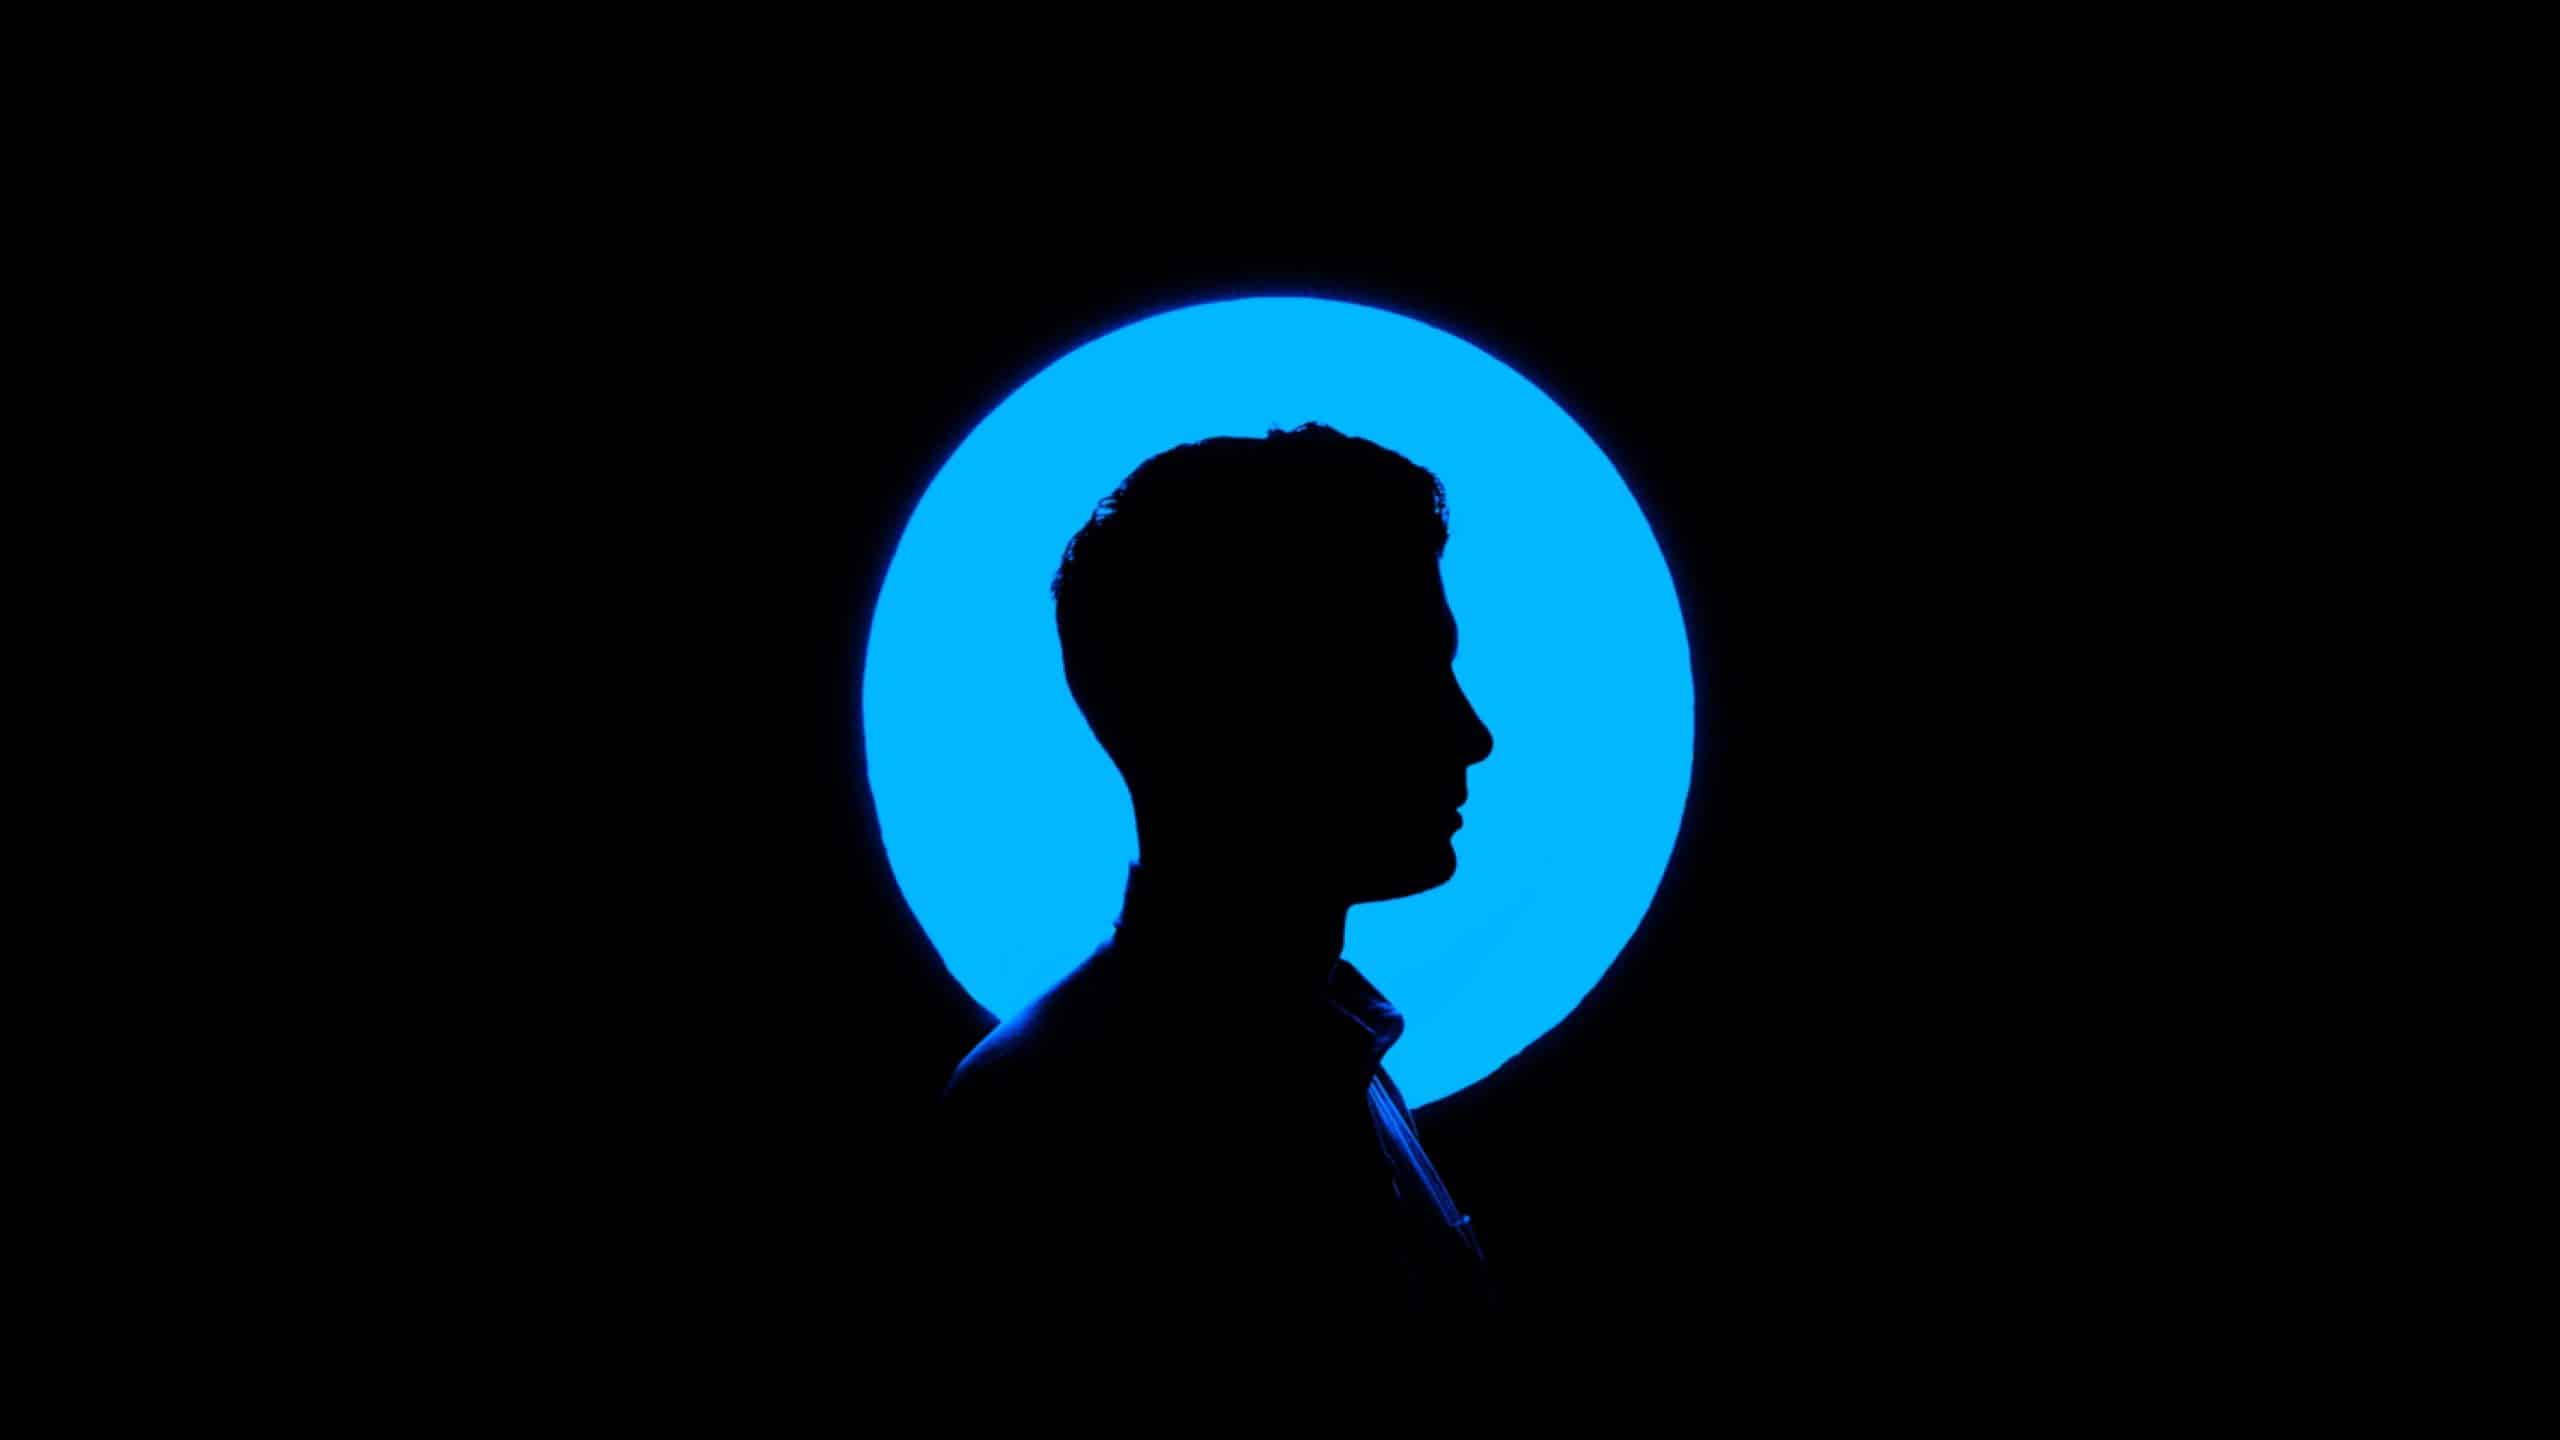 A person in silhouette representing the protection of witnesses identities